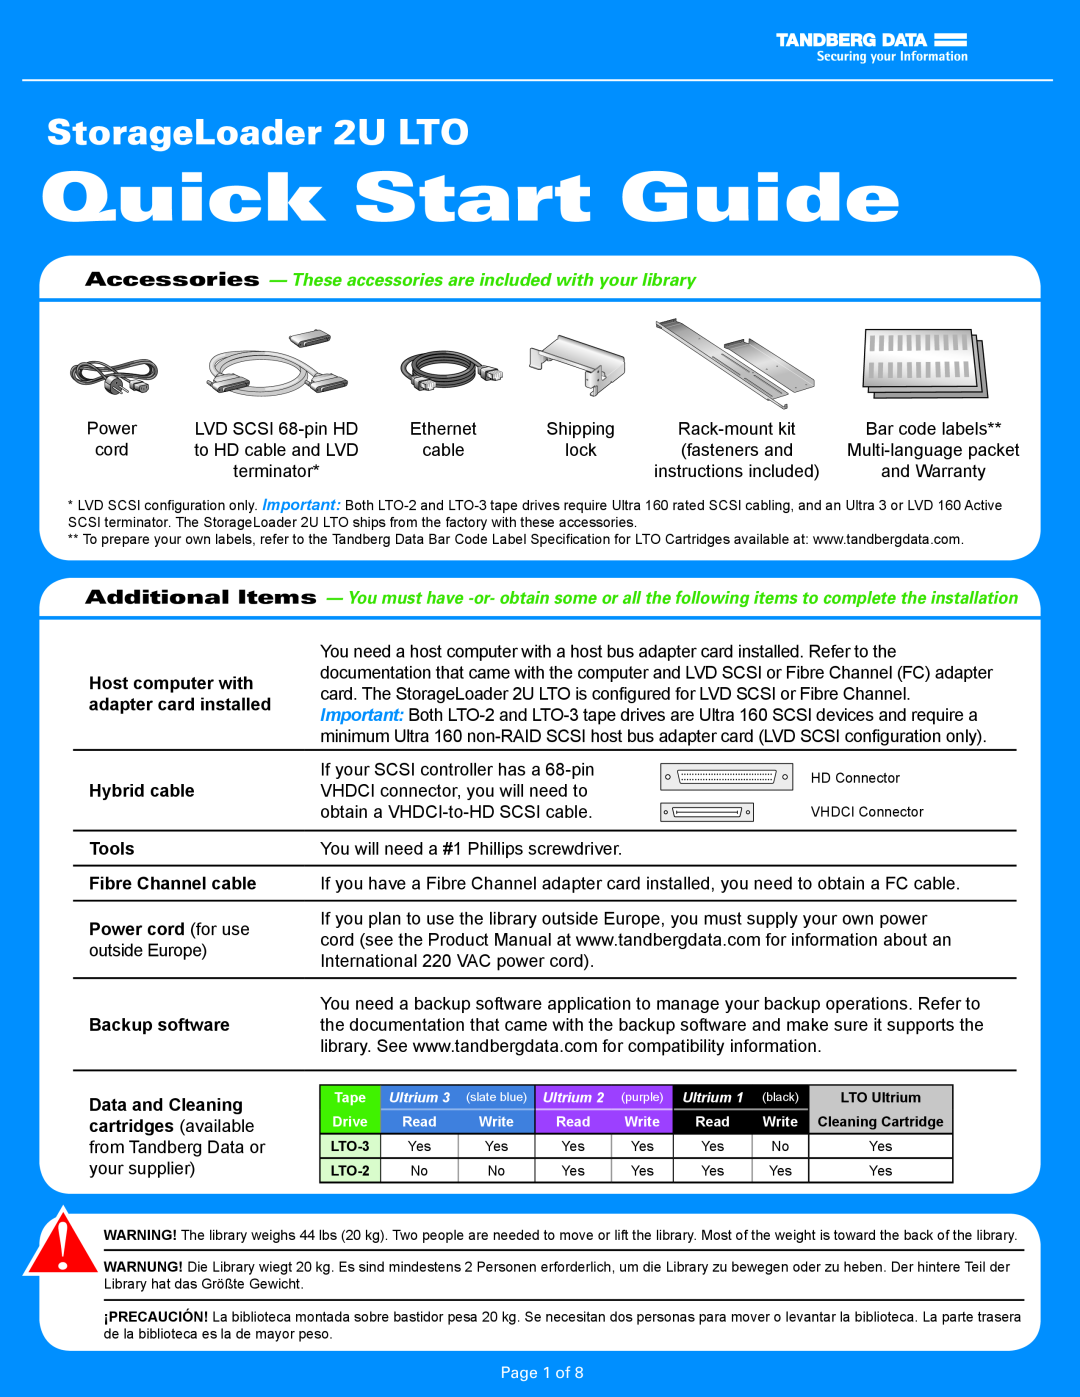 Tandberg Data 2U LTO quick start Accessories - These accessories are included with your library, Quick Start Guide 